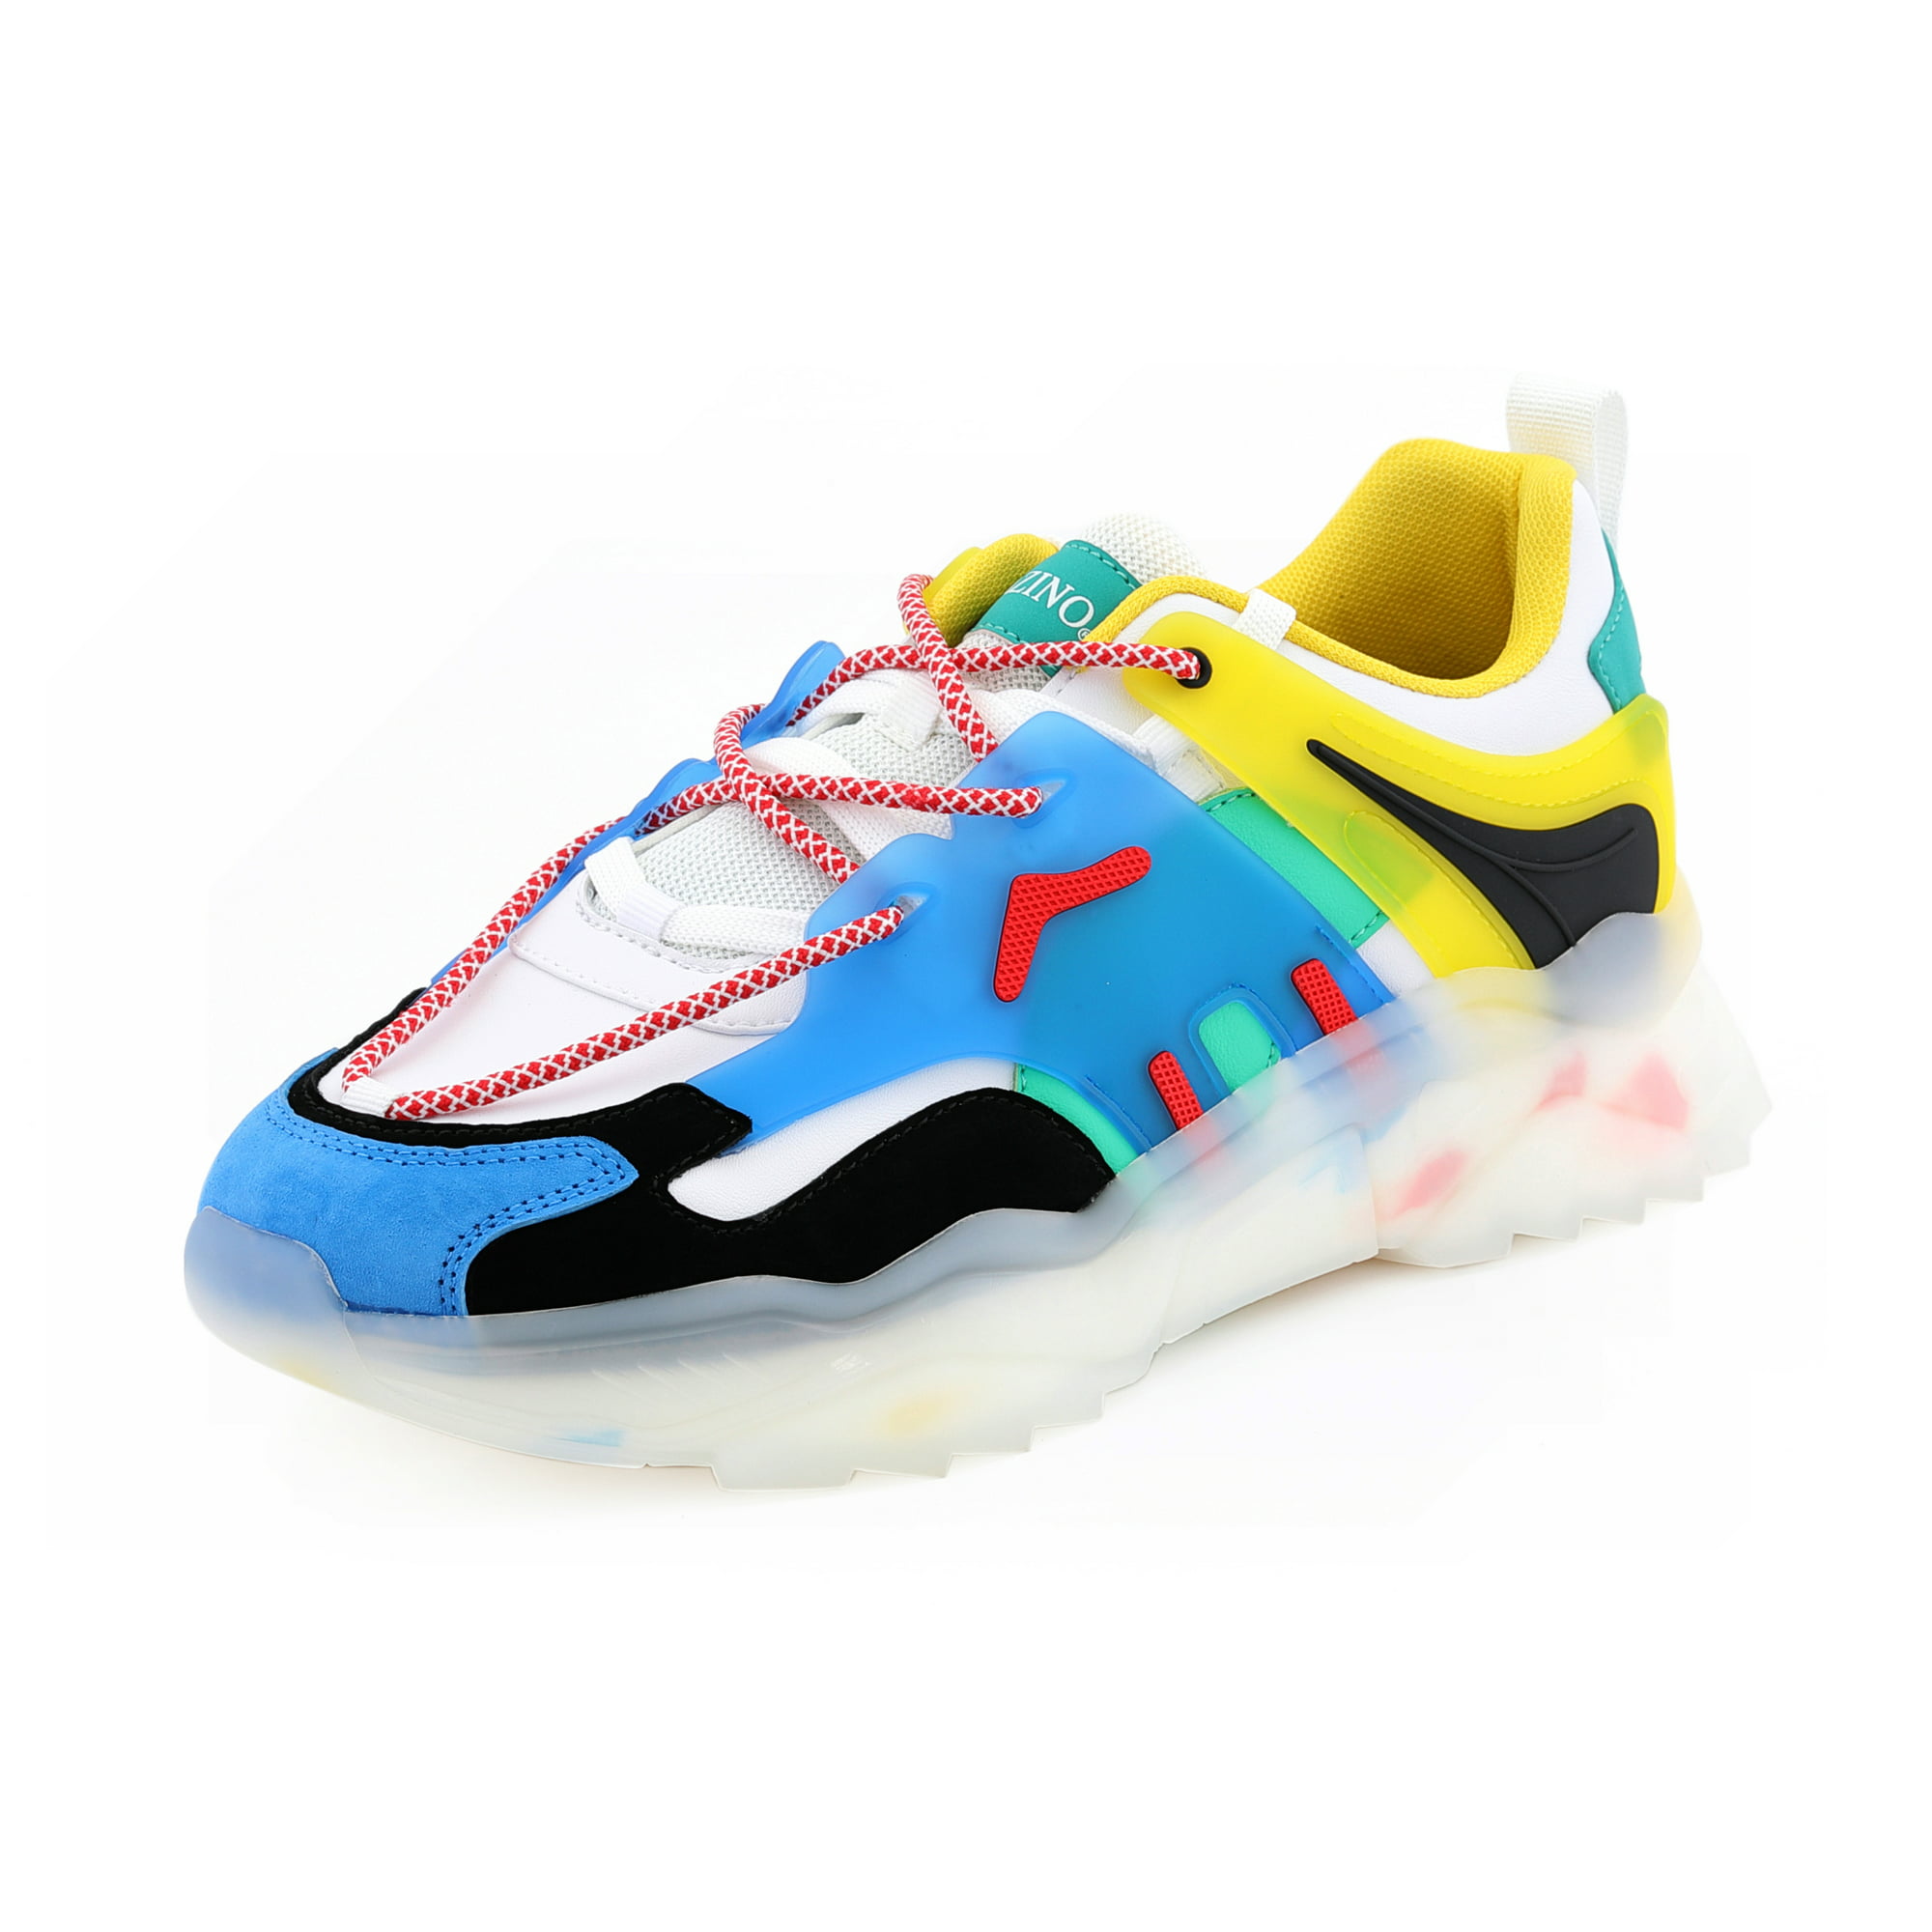 Multicolor Versace chain reactions they in good shape in they feel great